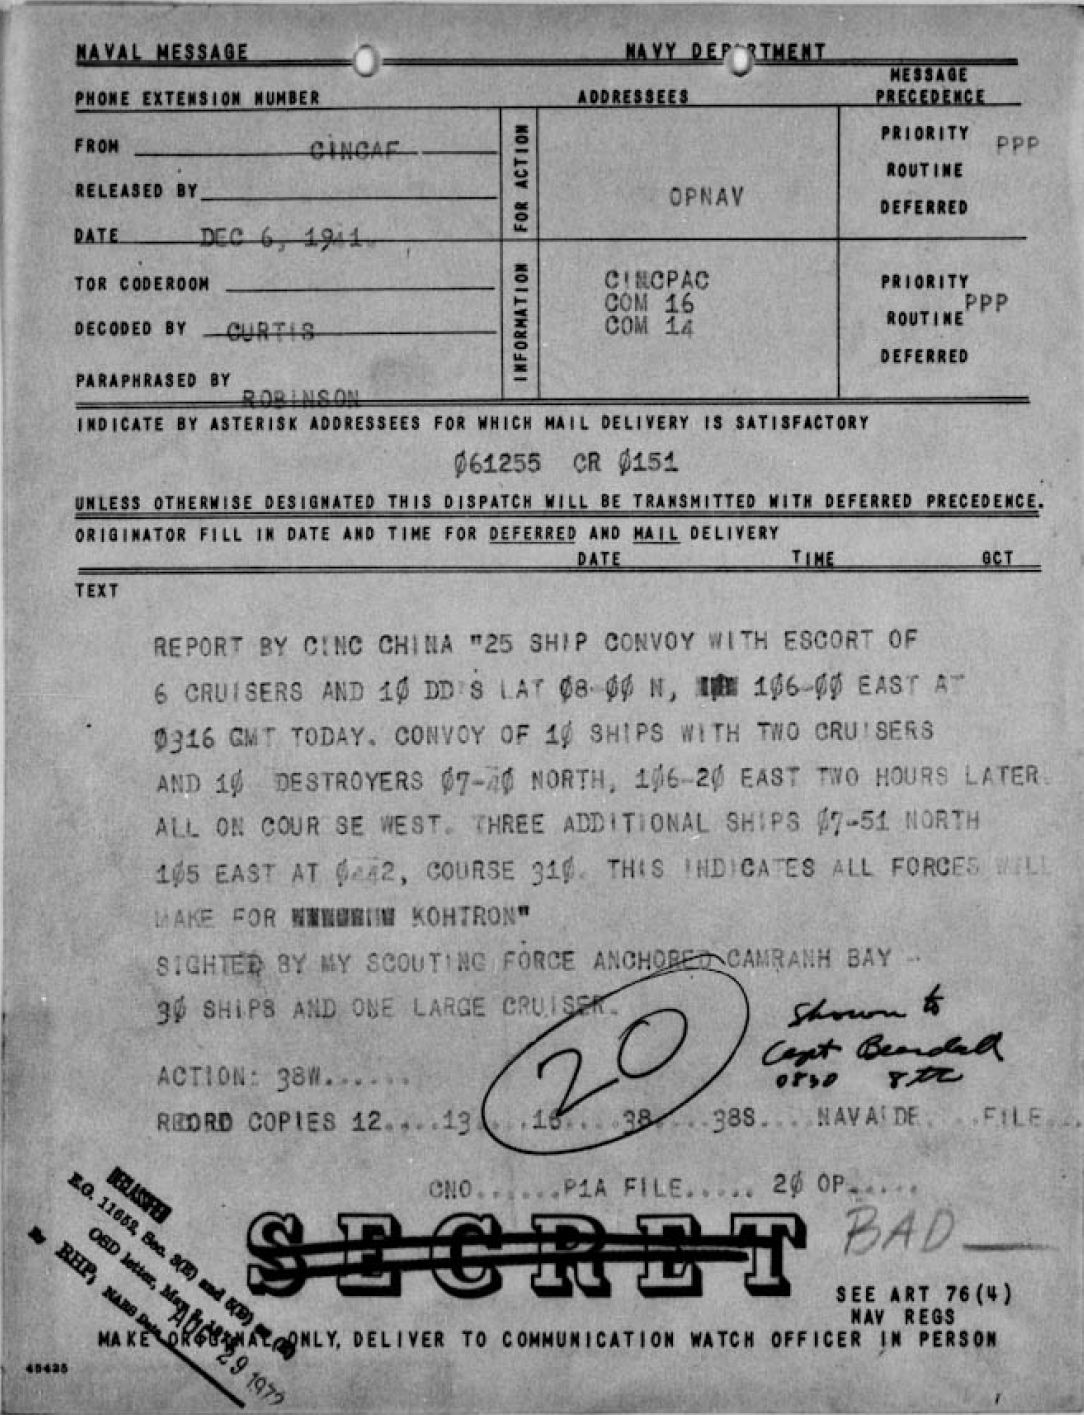 1941-12-06-Contact-Report-on-vessels-at-sea-the-day-before-the-attack-on-Pearl-Harbor